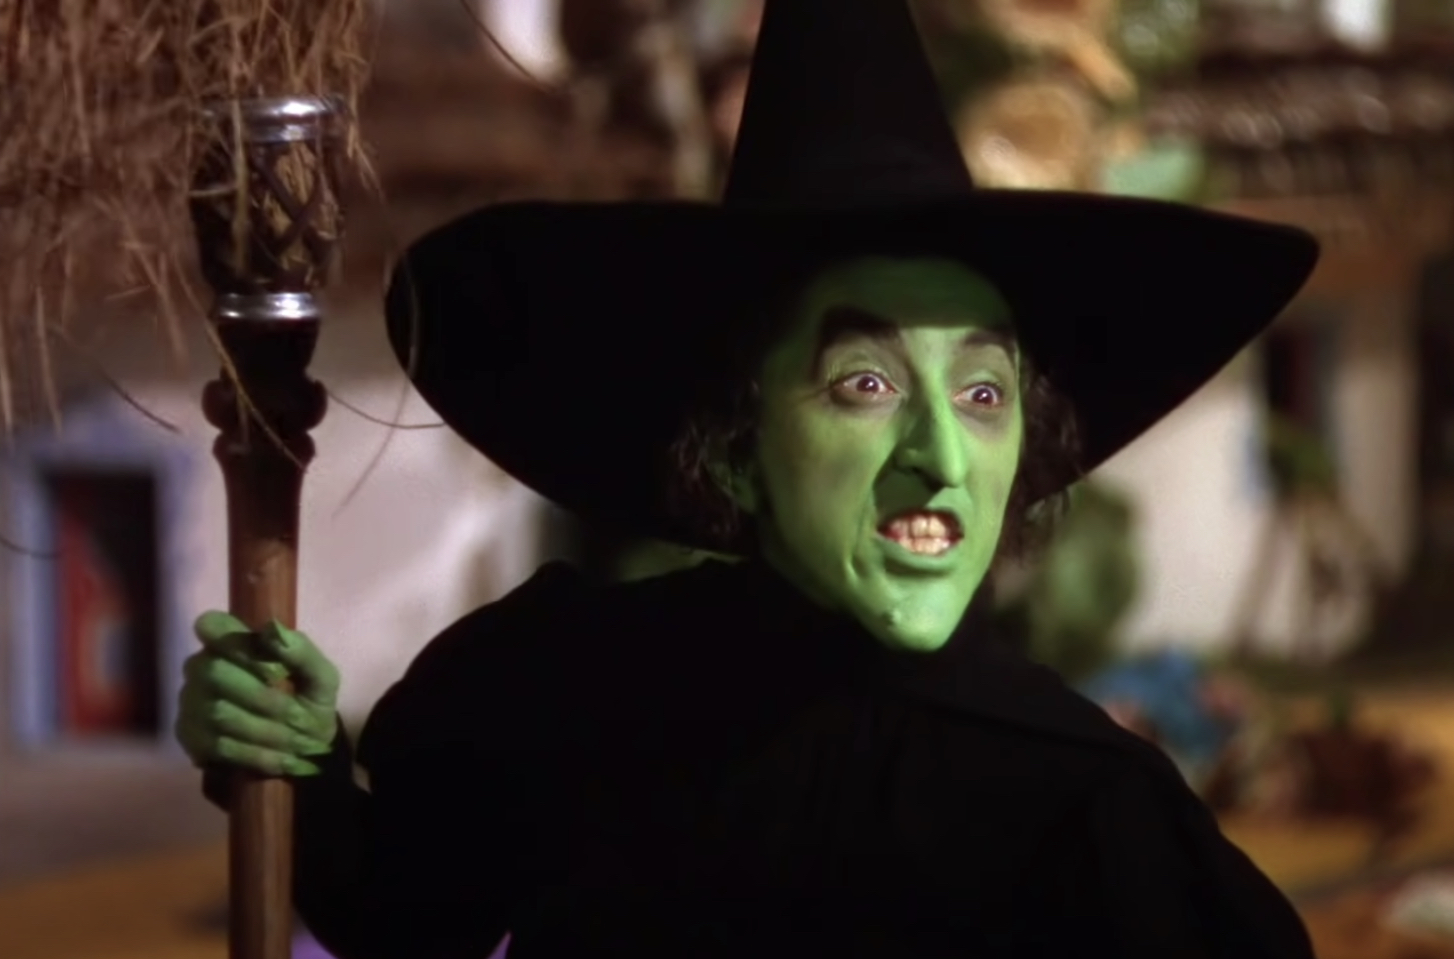 The Wicked Witch of the West holding a broom